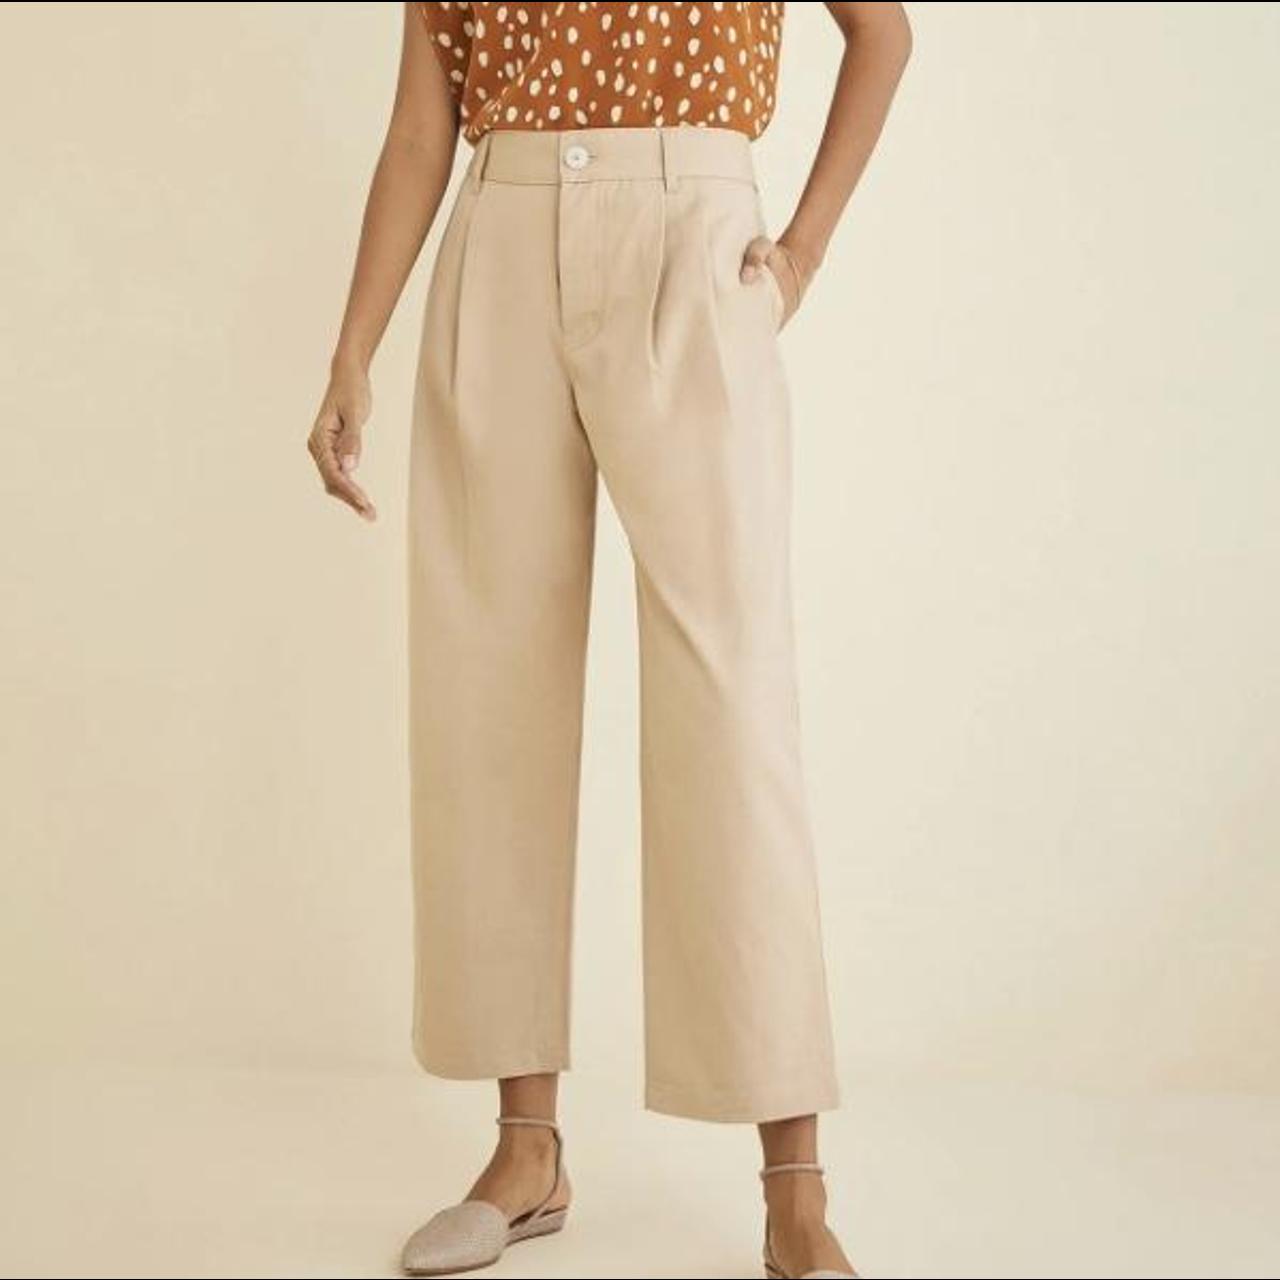 Amour Vert Women's Tan and Cream Trousers